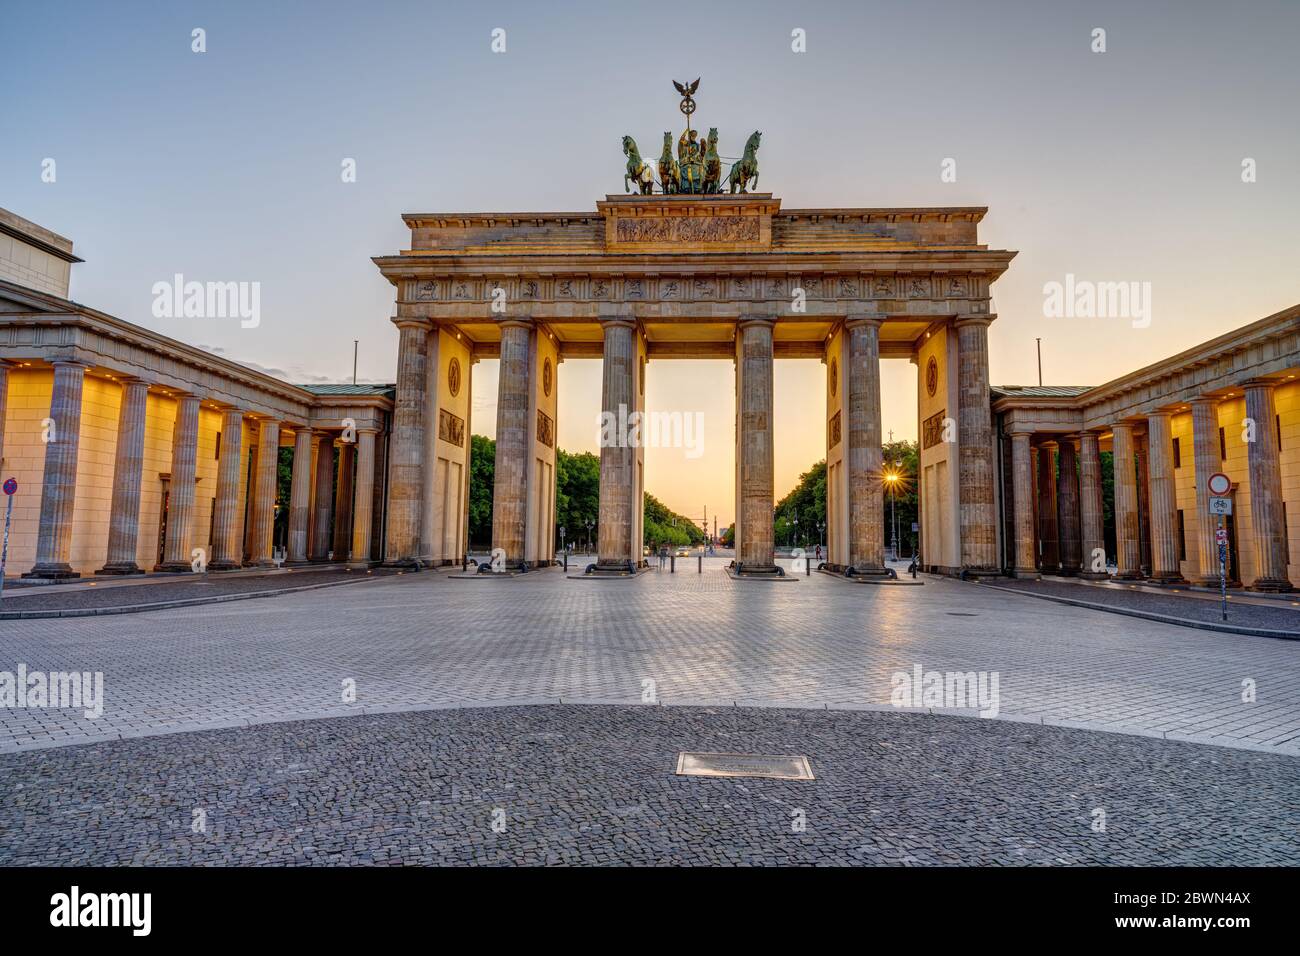 The illuminated Brandenburg Gate in Berlin after sunset with no people Stock Photo